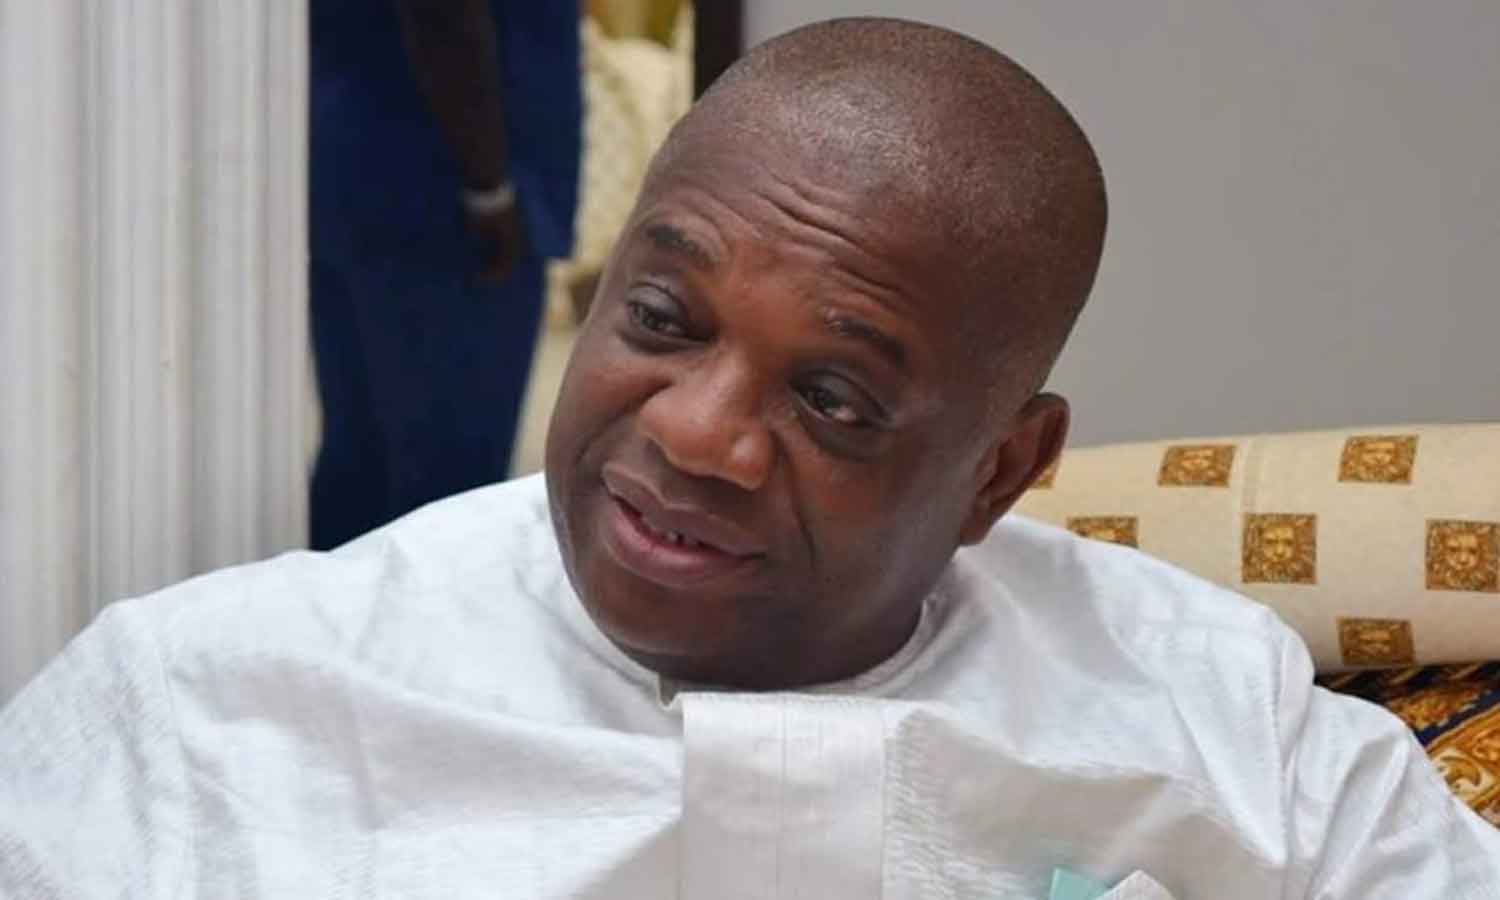 Breaking: Protesters storm NASS, call on Senate President to declare Orji Kalu's seat vacant